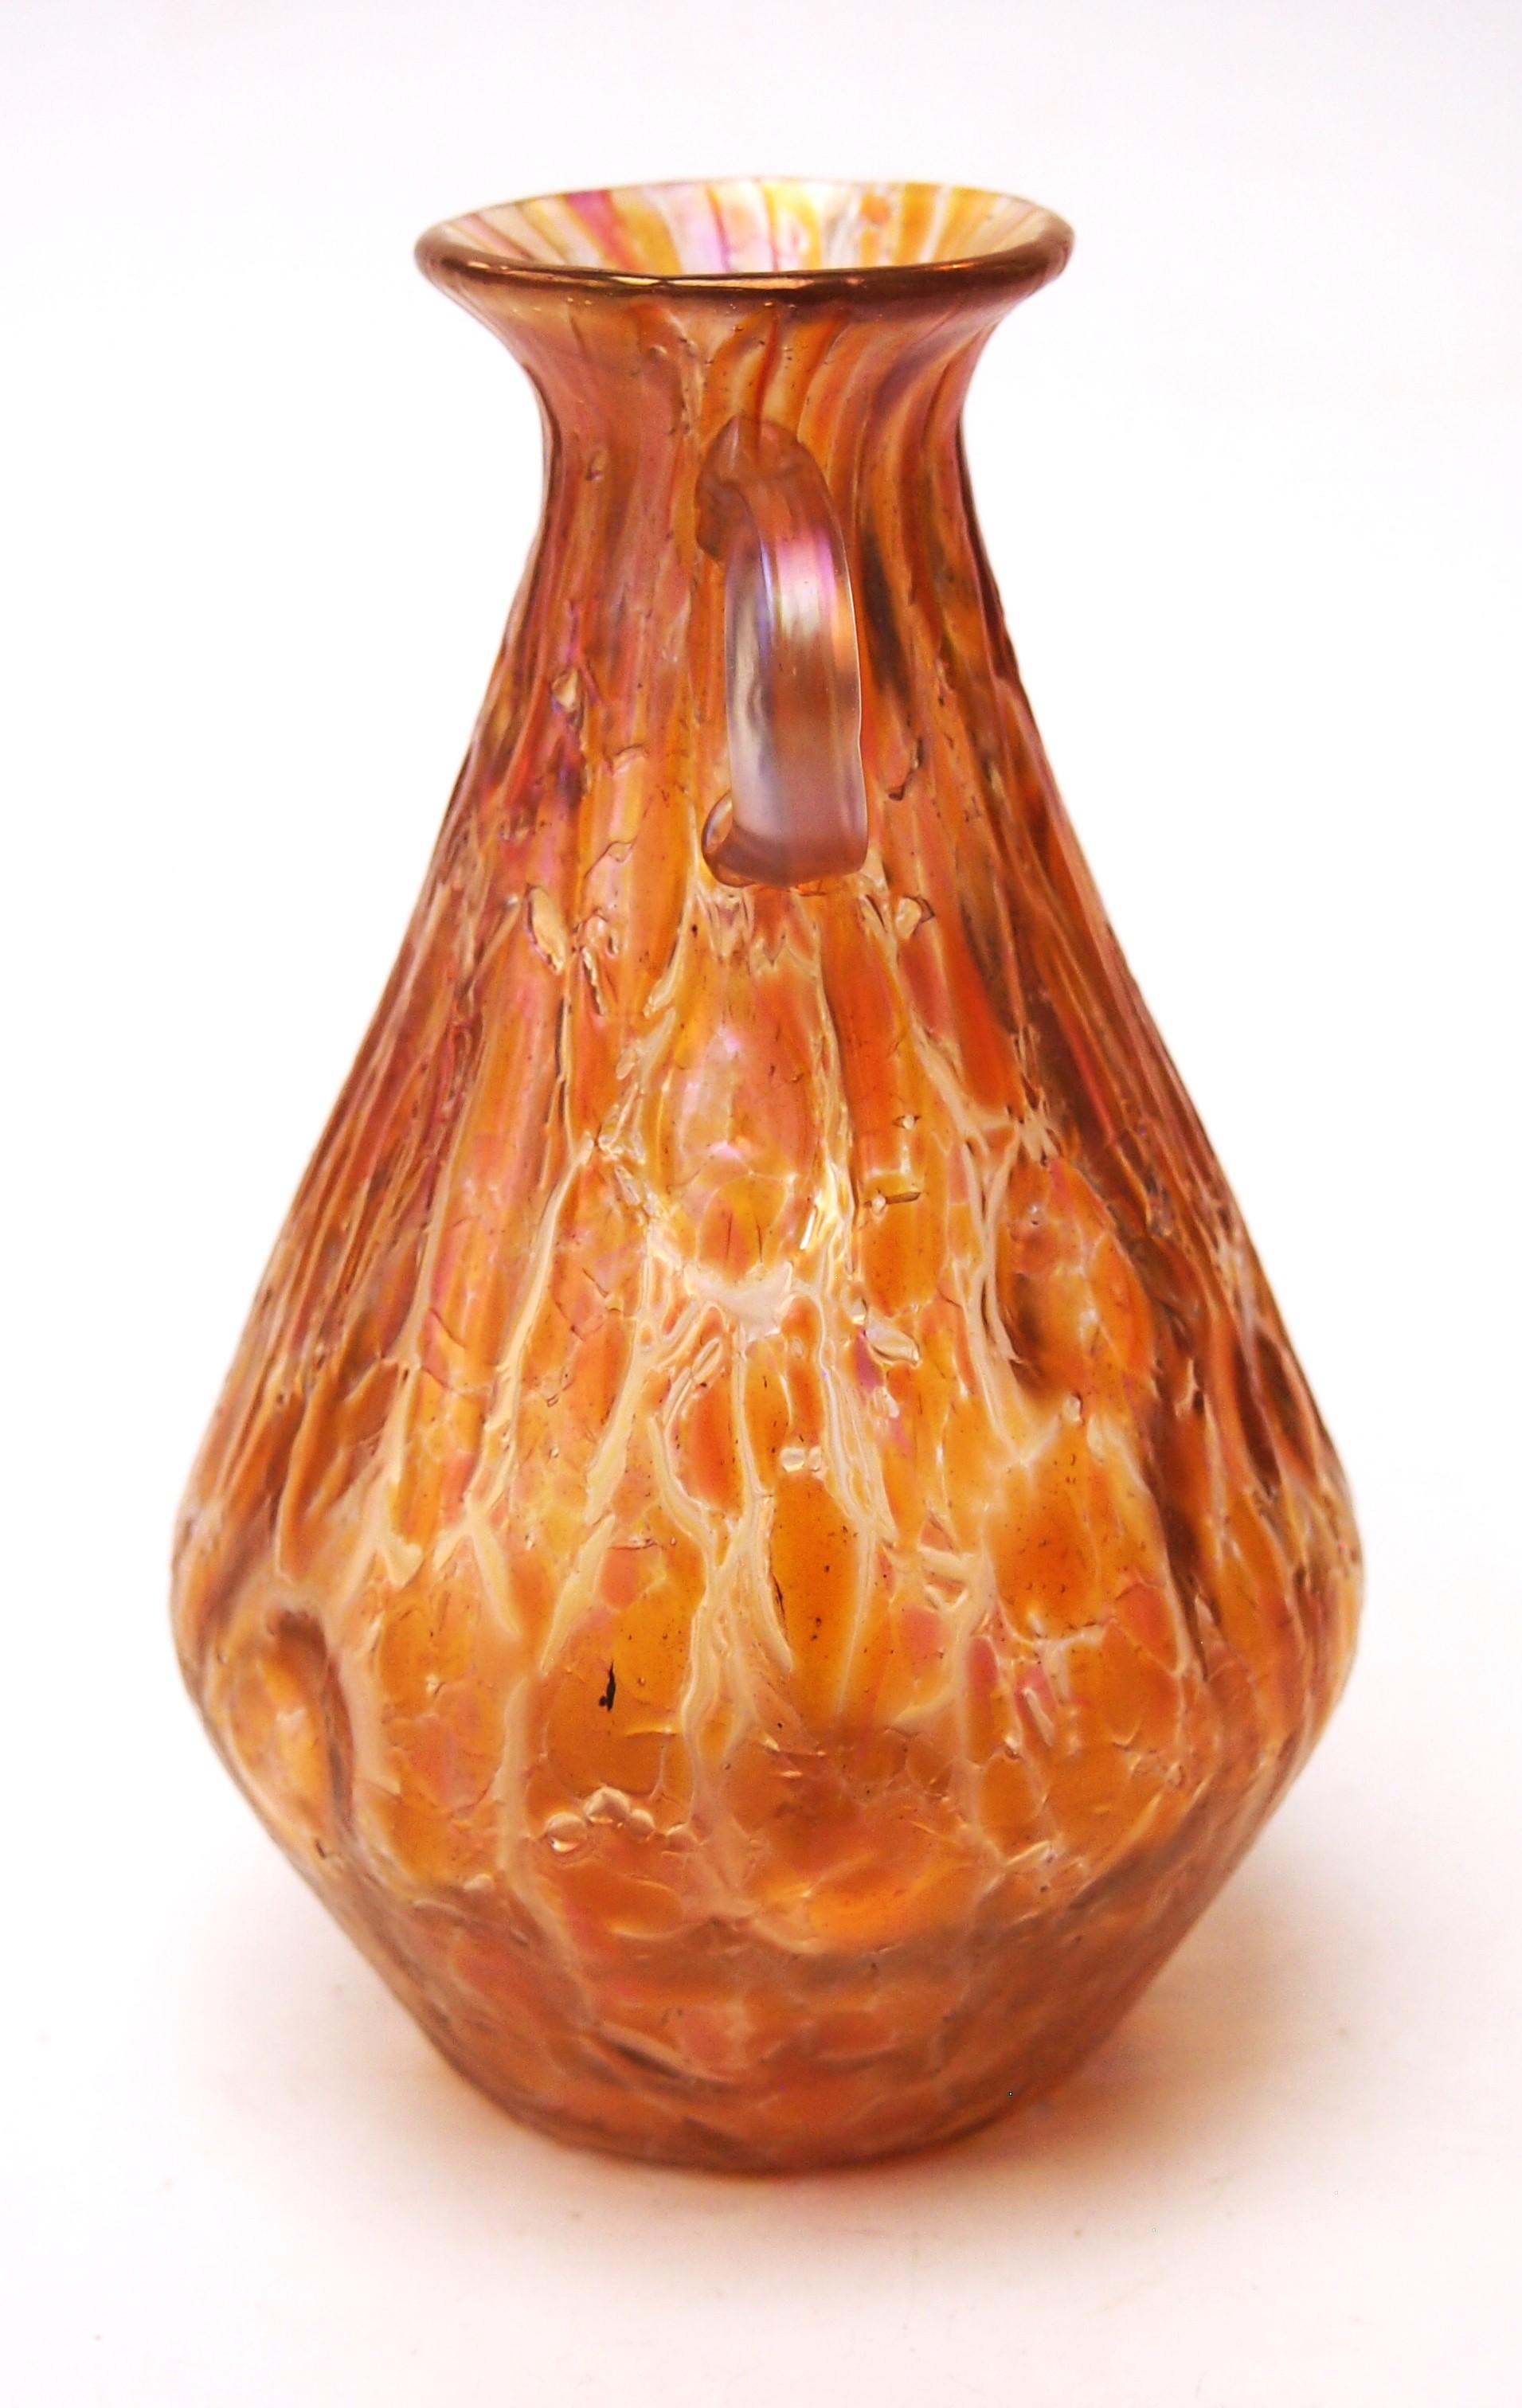 Unusual Loetz orange two handled vase in the documented pattern called Astglas. This version of the pattern Astglas has a surface covered with orange coloured craquelure of densely fused crushed glass and occasionally adorned with Silberiris coral